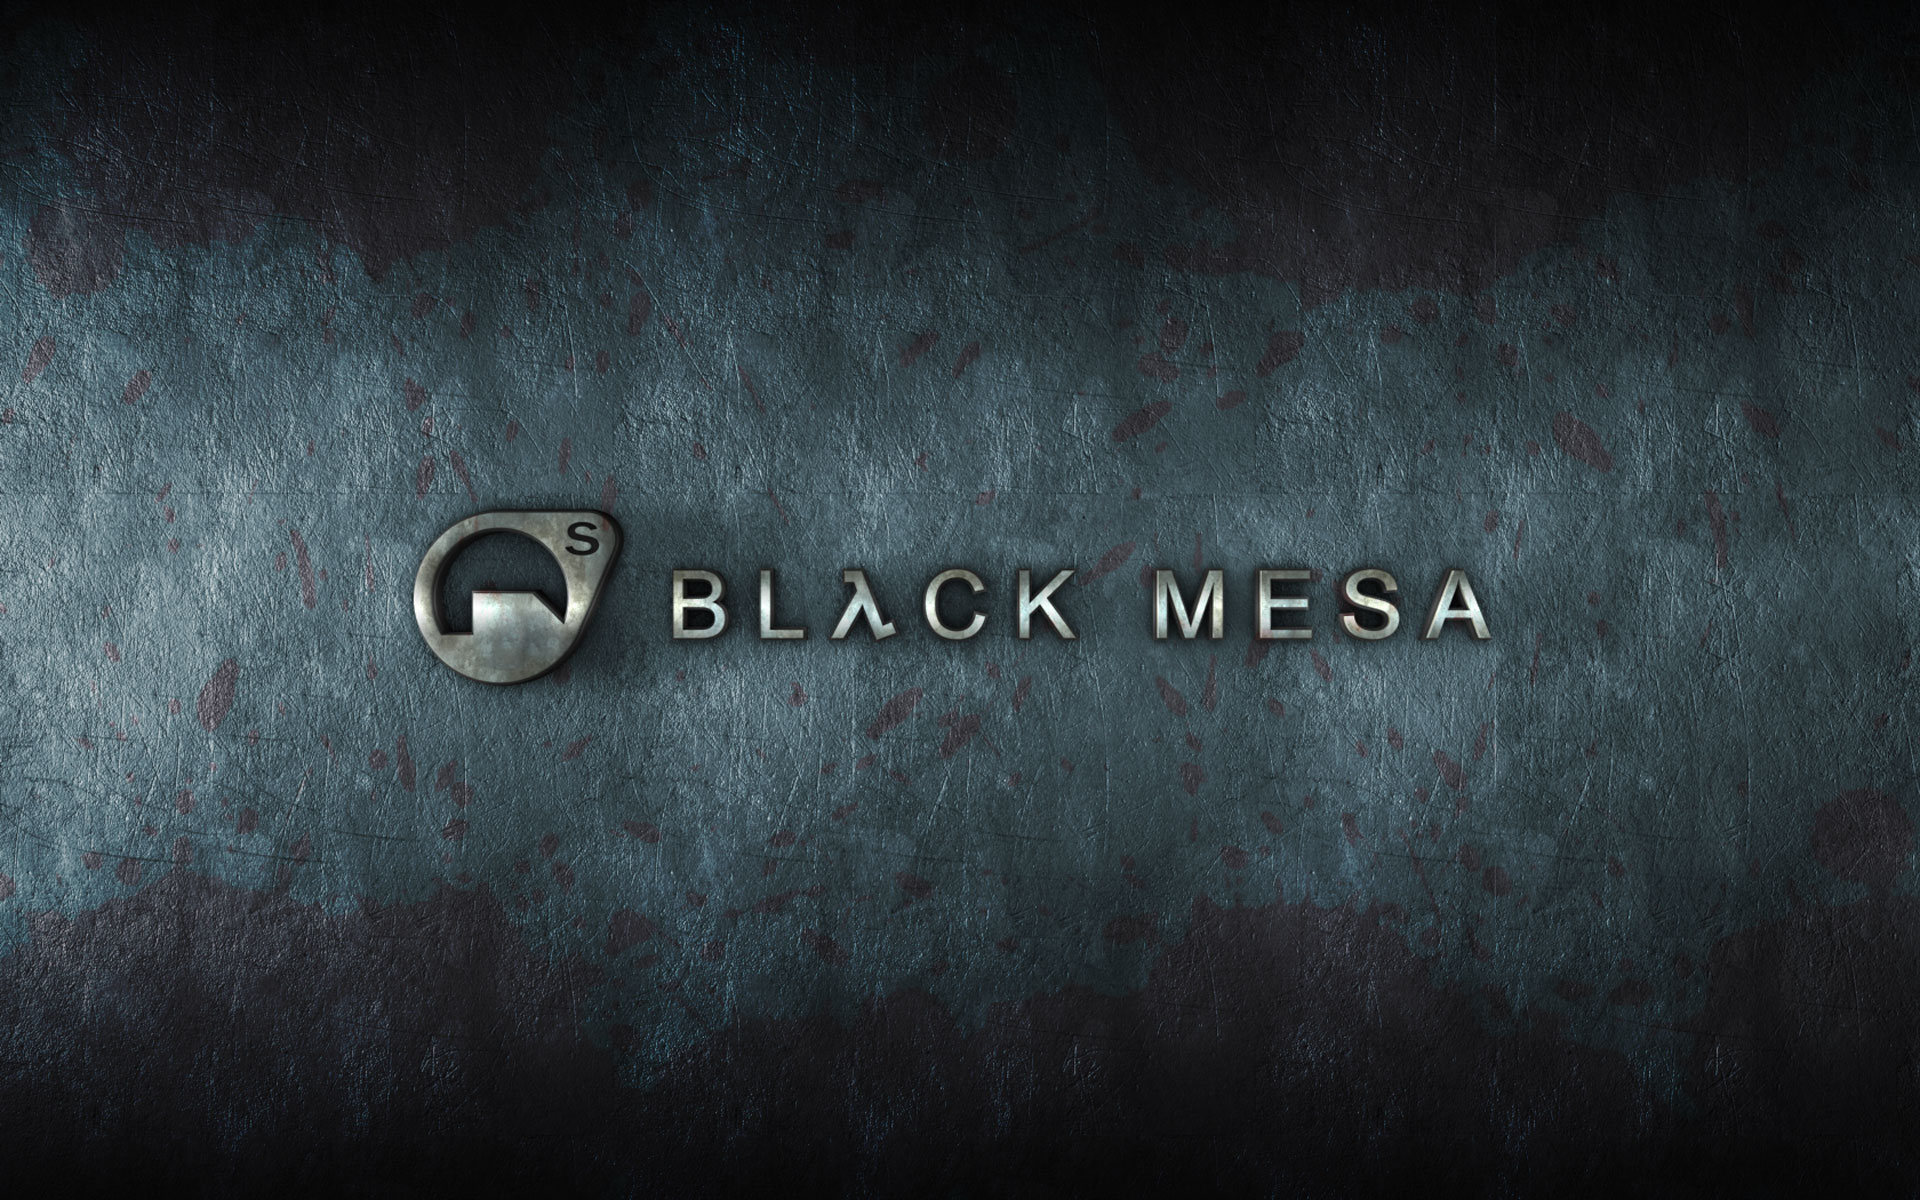 Half Life Remake Black Mesa Enters Steam Early Access